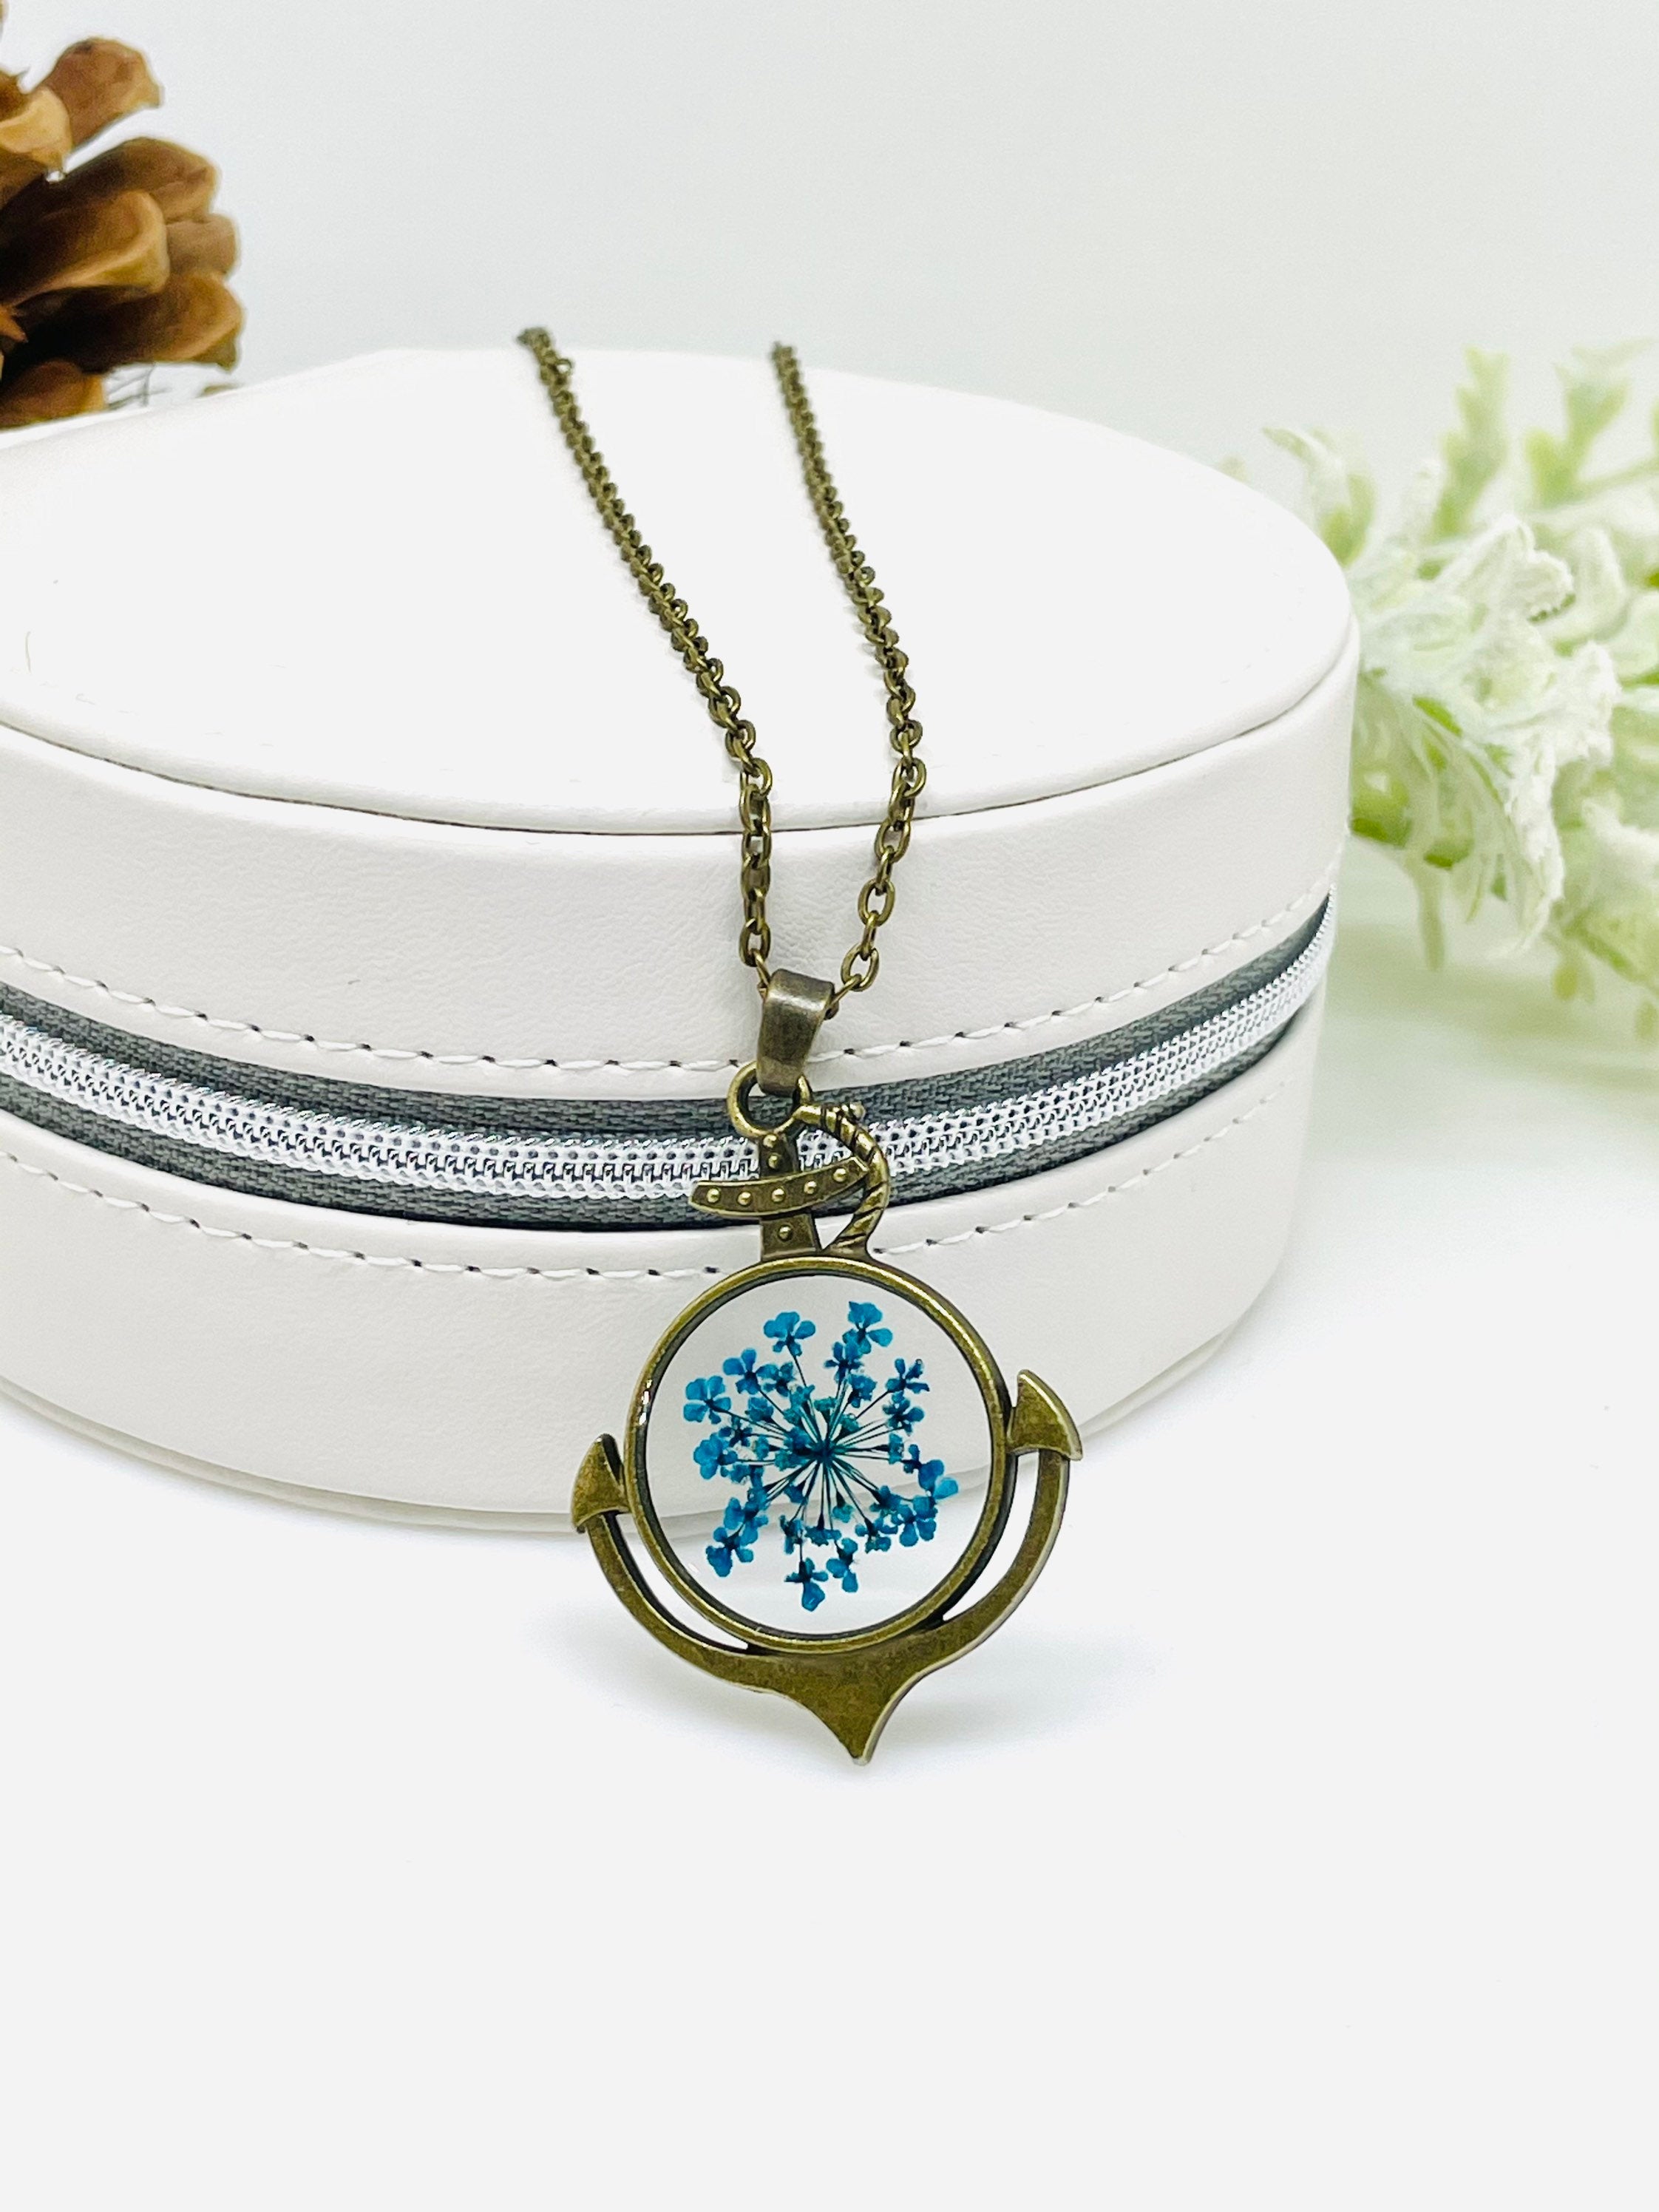 Pressed Flower Necklace in Anchor